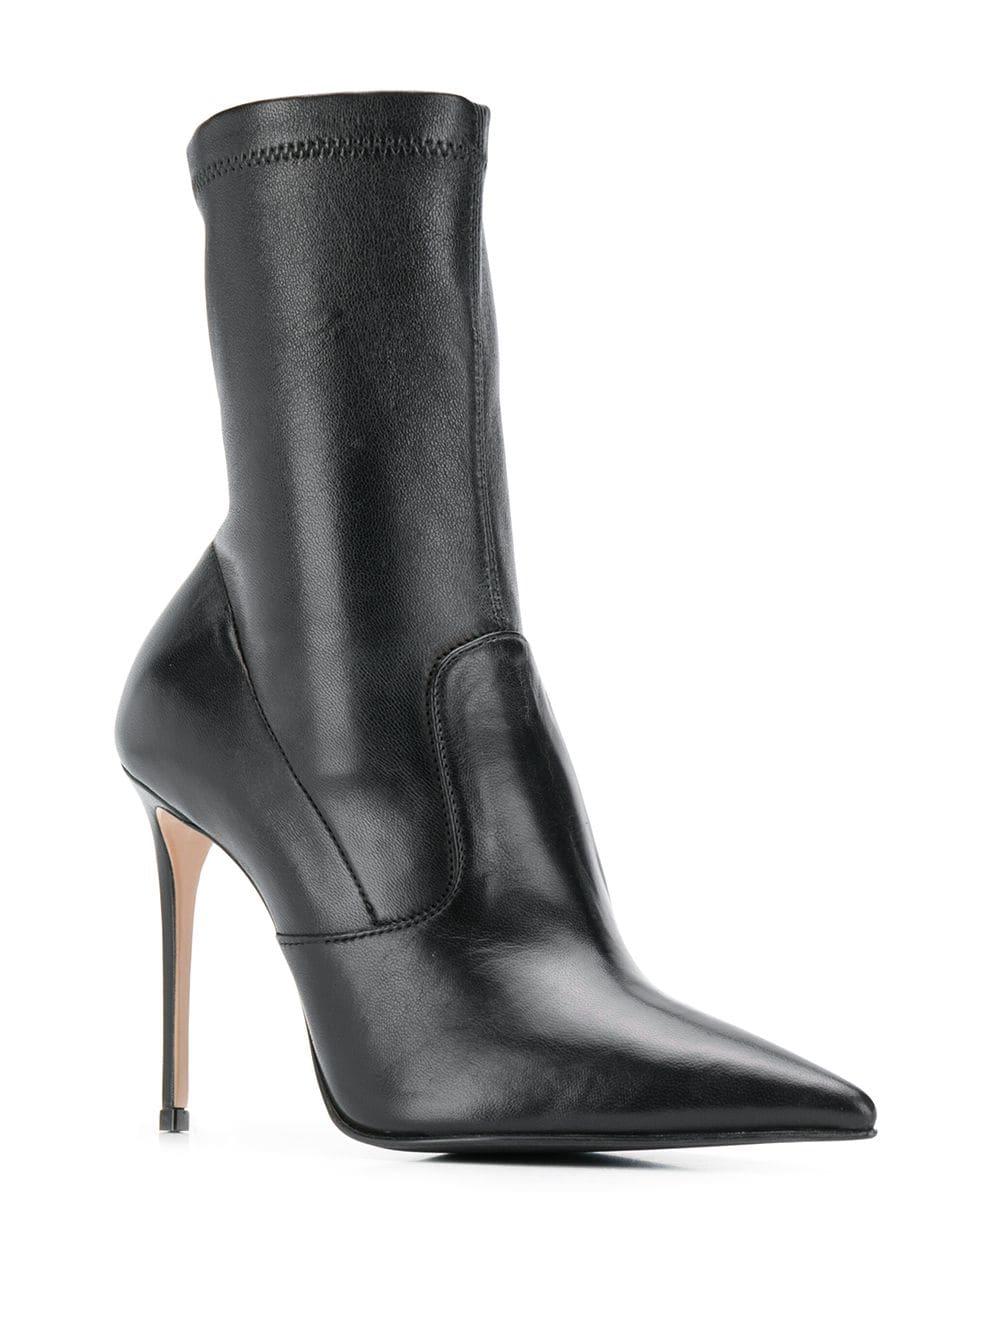 Le Silla Leather Eva Ankle Boots in Black Lyst